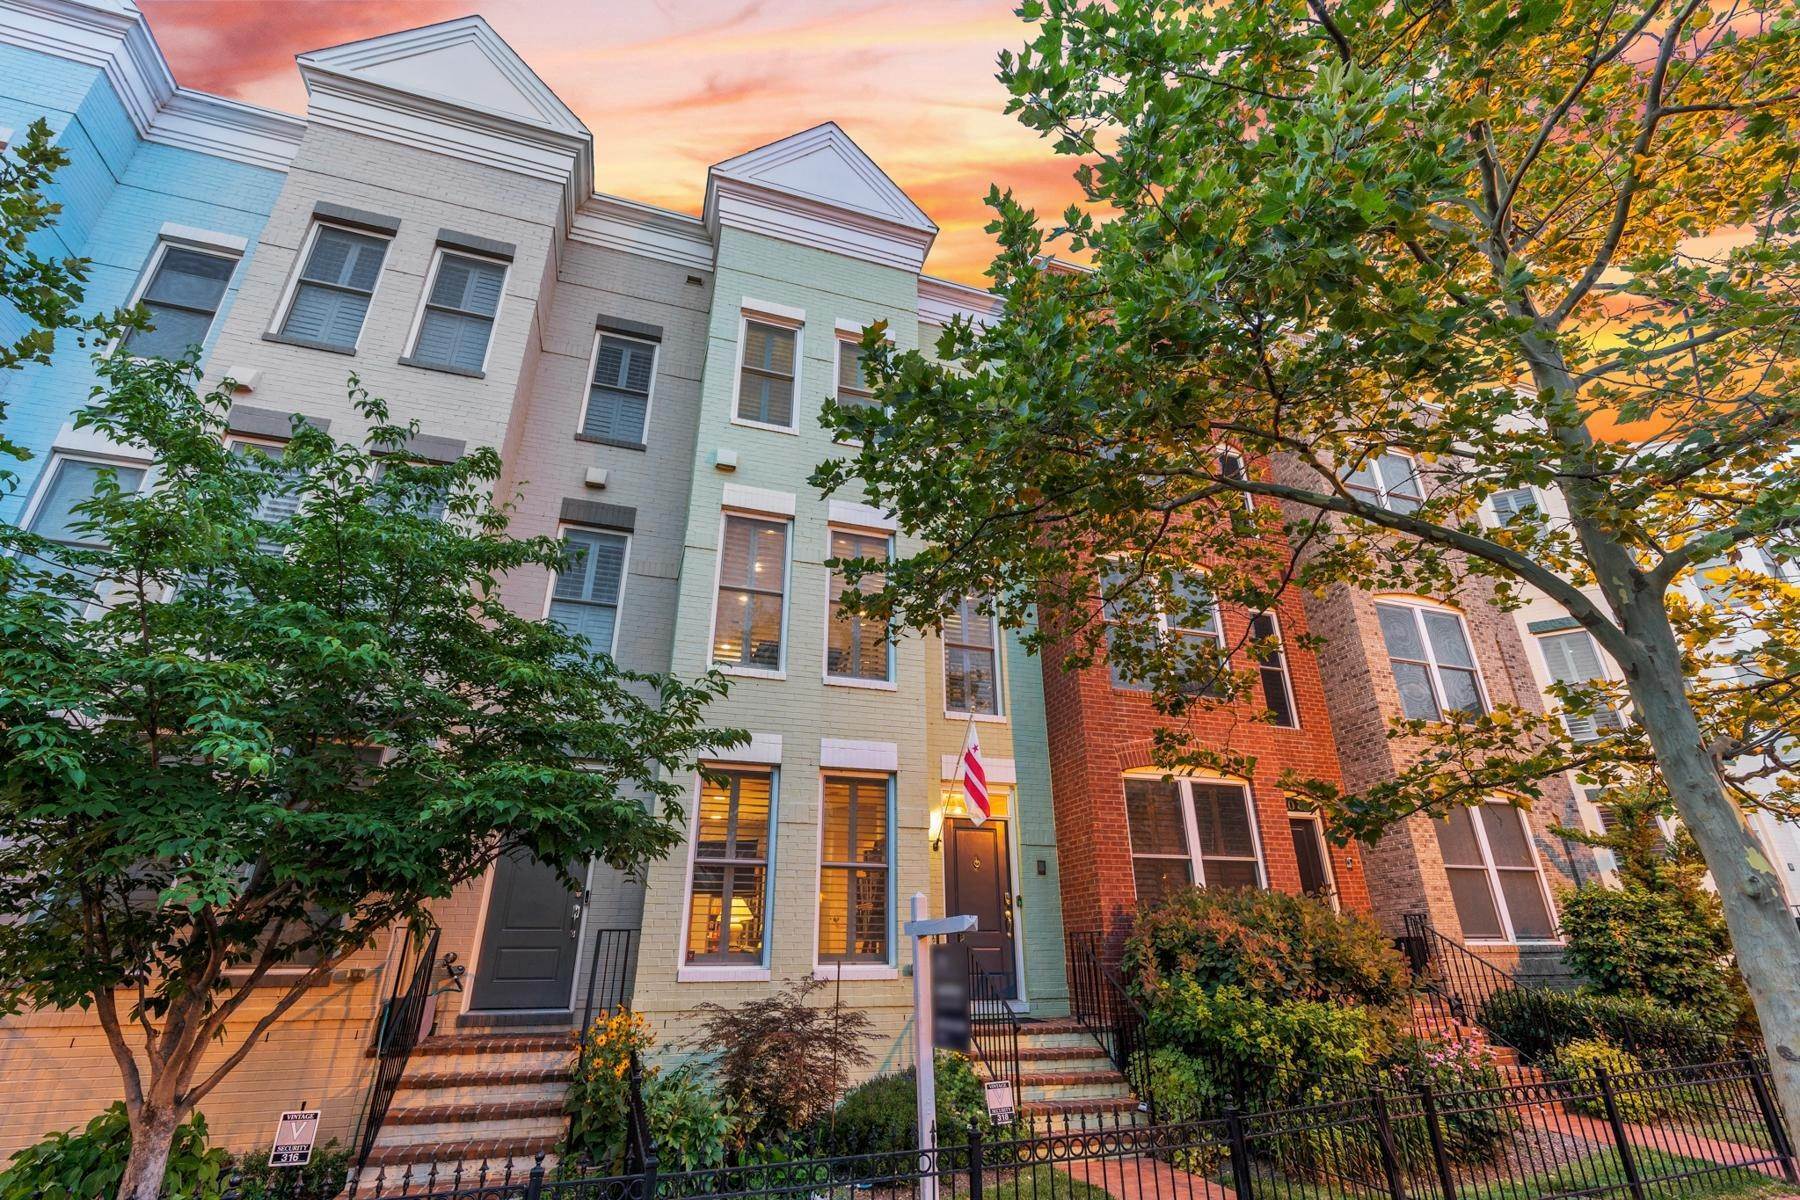 Other Residential Homes for Sale at 318 I St Se Washington, District Of Columbia 20003 United States